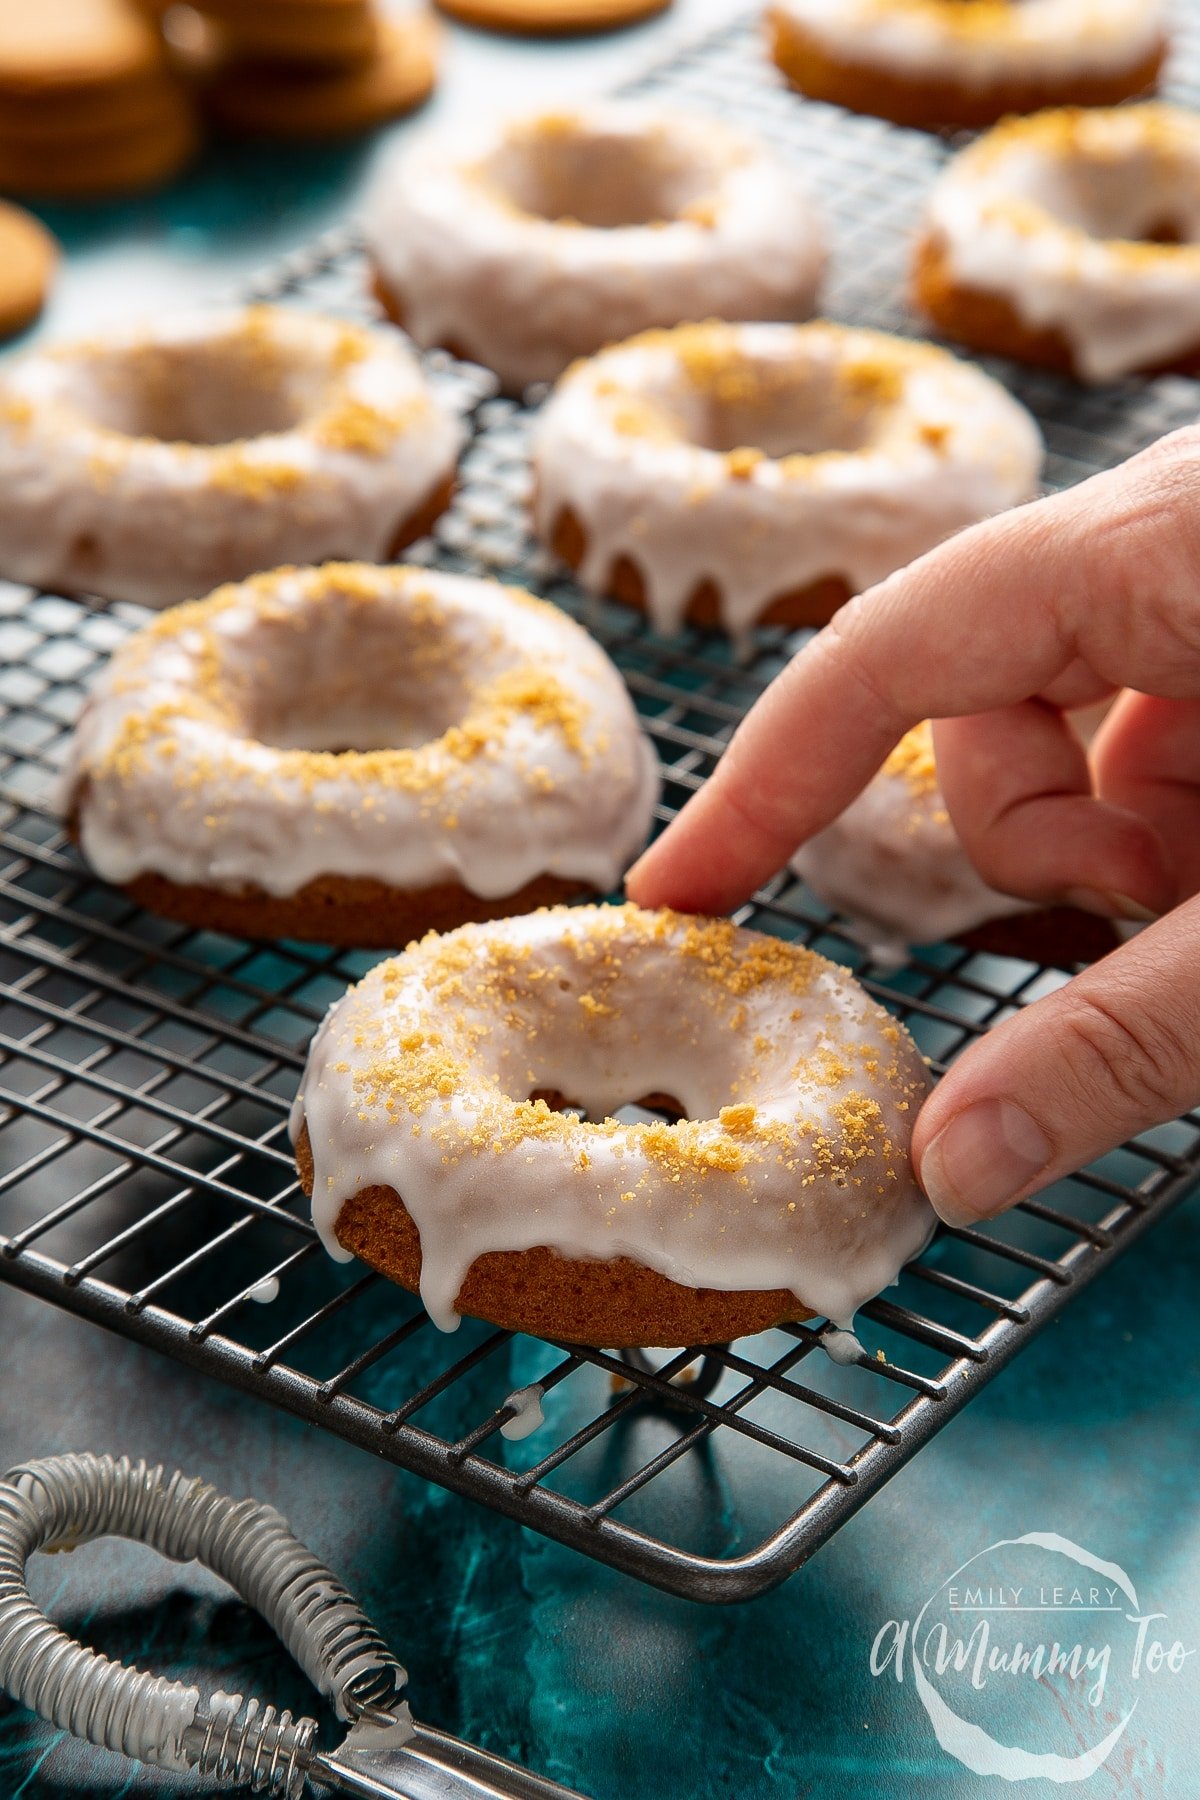 Baked gingerbread donuts with a lemon glaze on a wire cooling rack. A hand reaches for one.